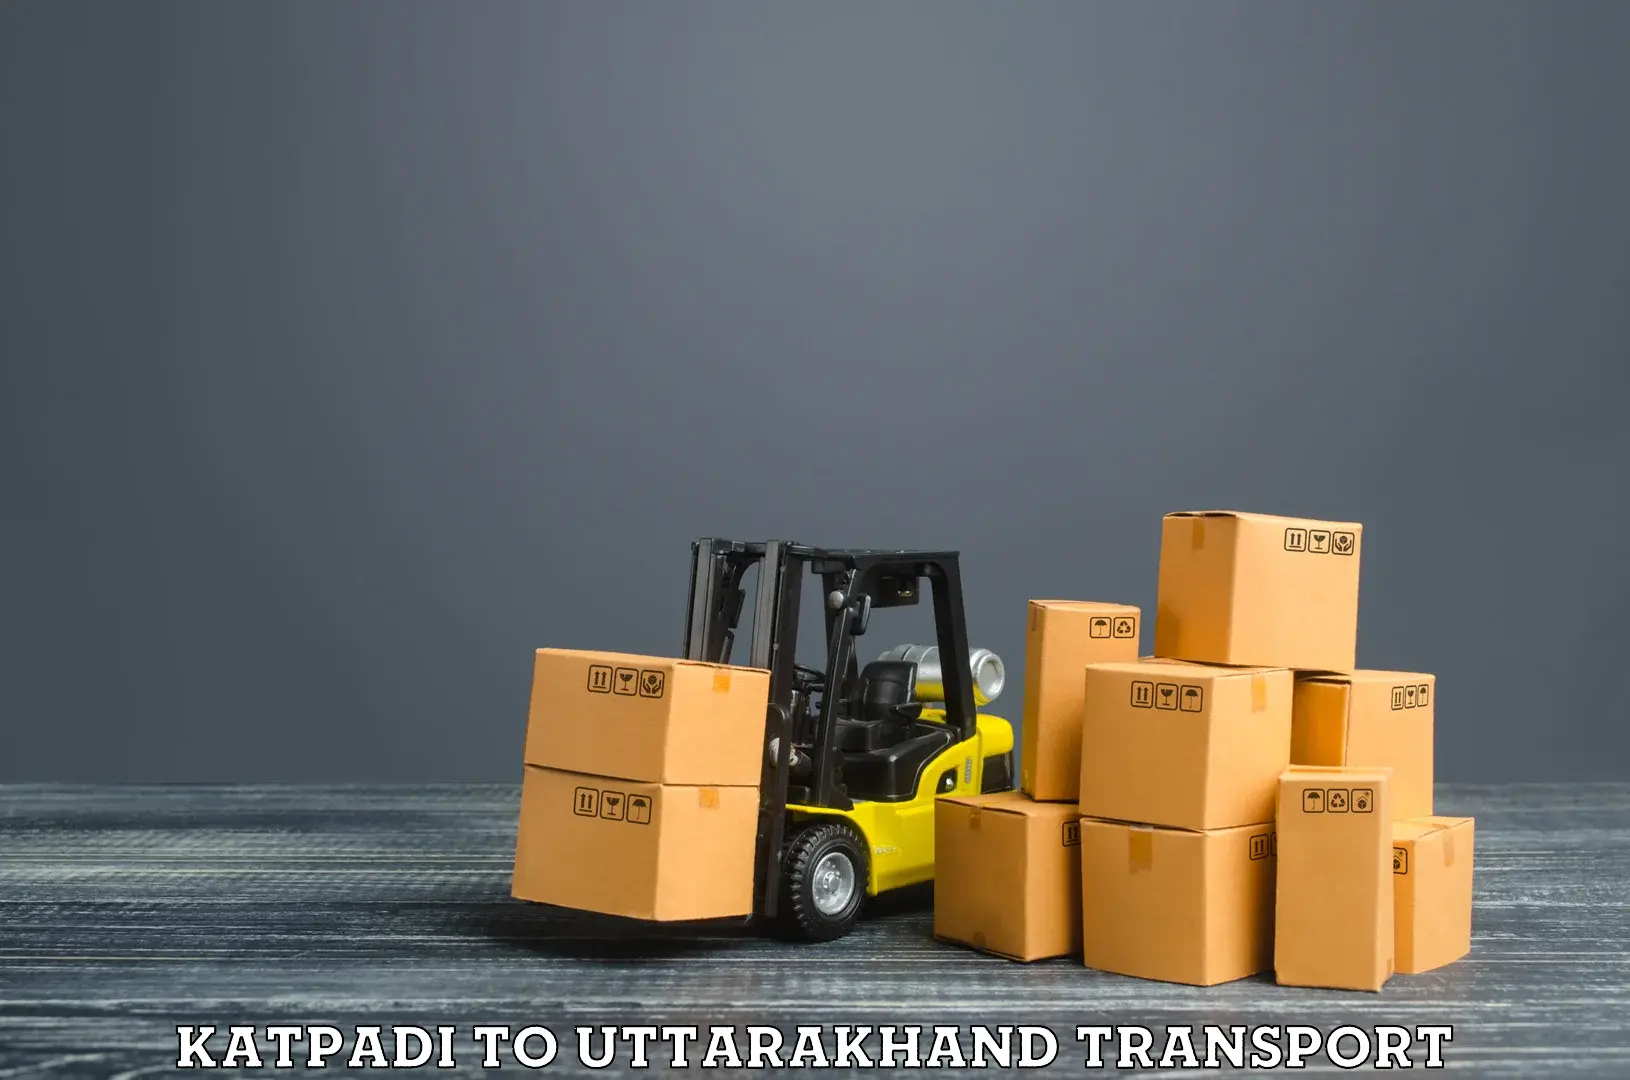 Air freight transport services in Katpadi to IIT Roorkee